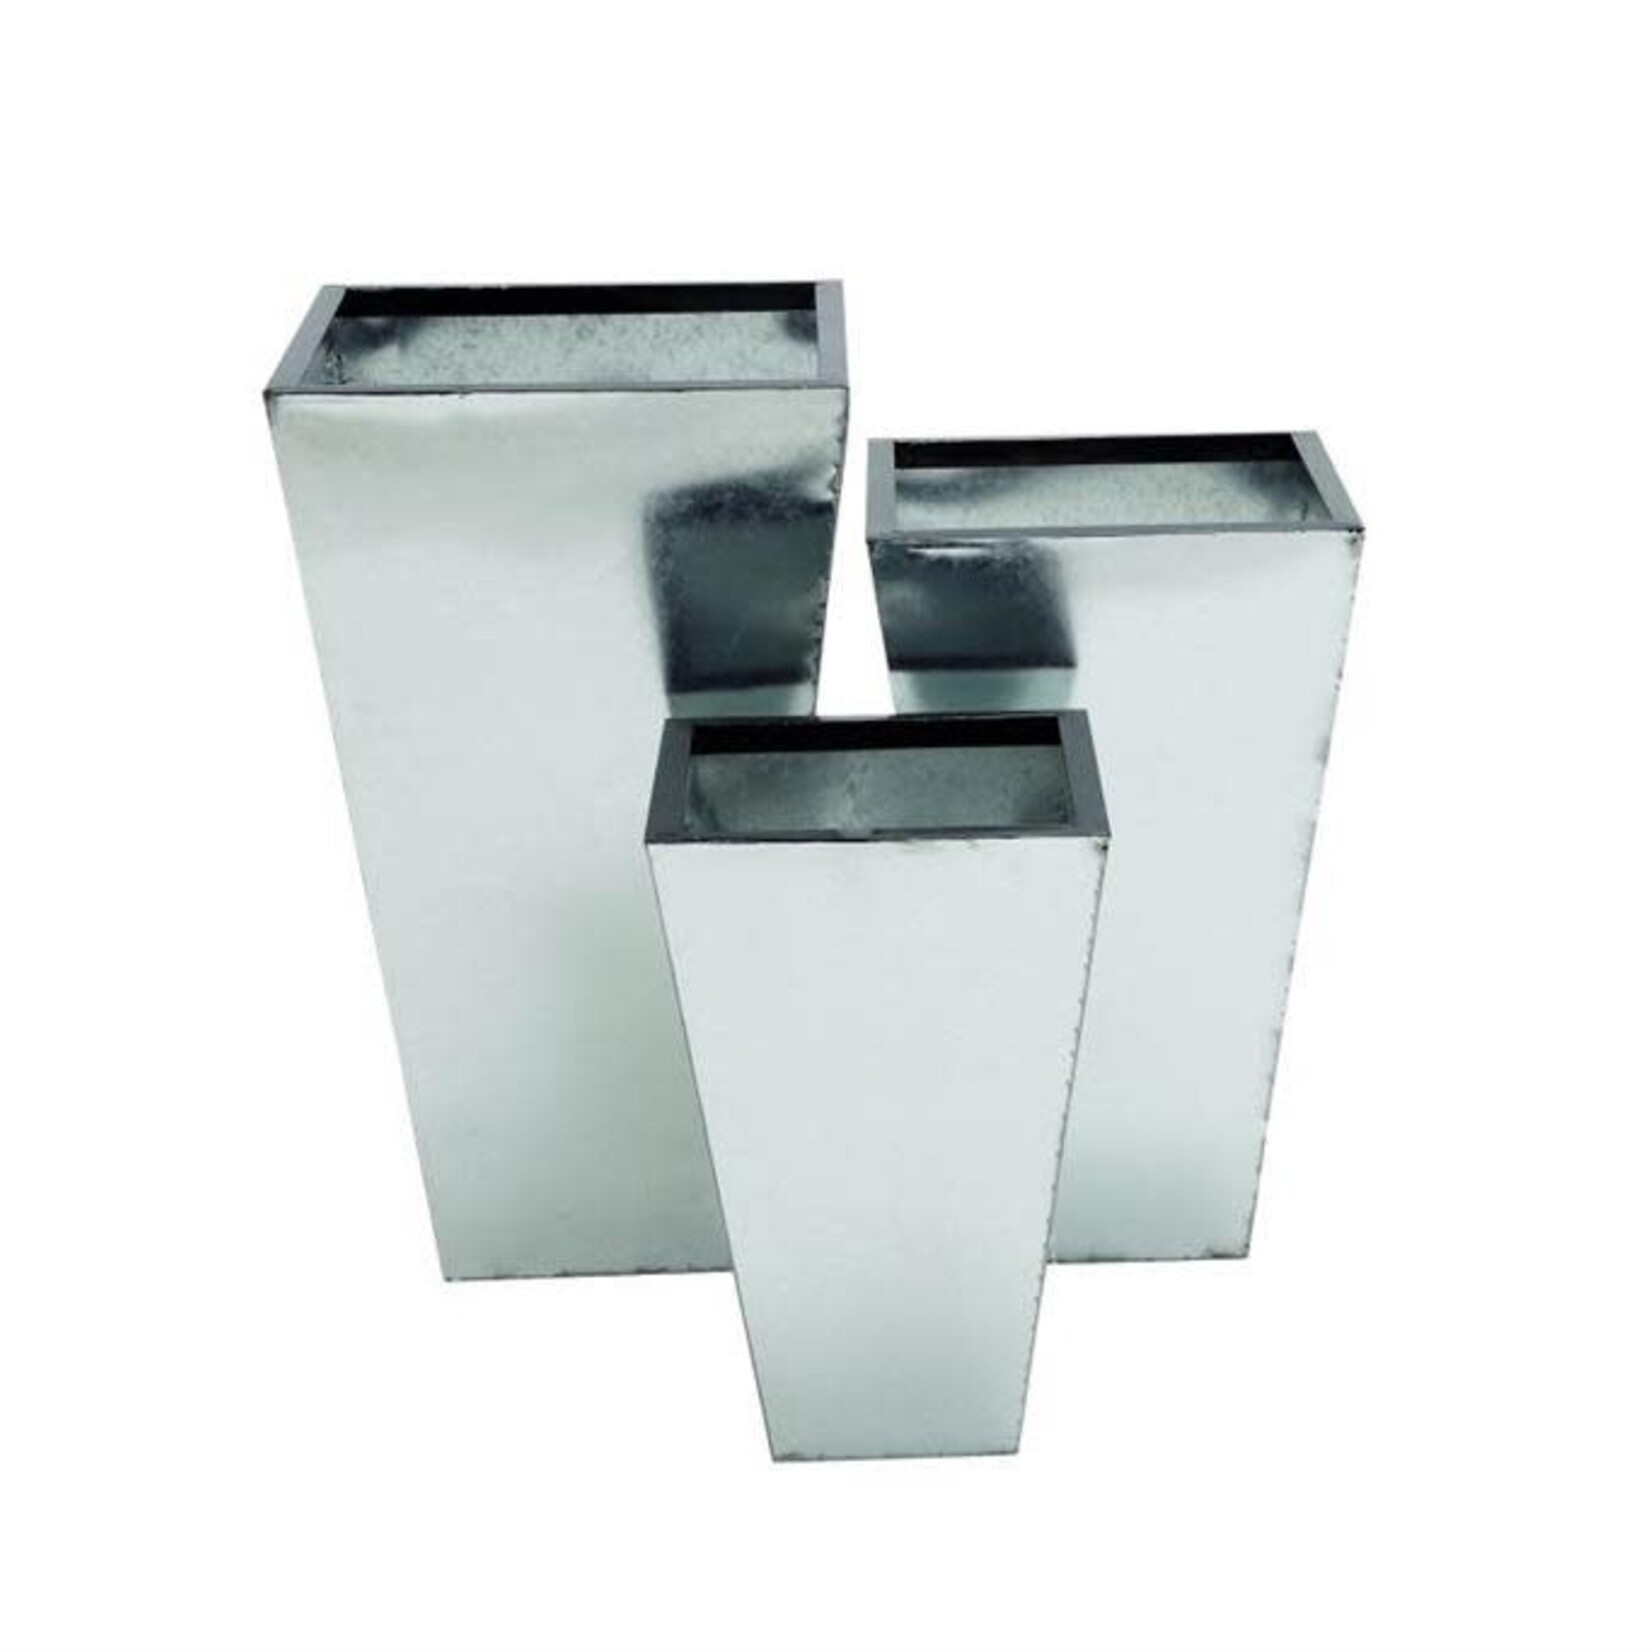 60% OFF WAS $56 NOW $22.40, 17”h x 11” SILVER METAL PLANT STAND